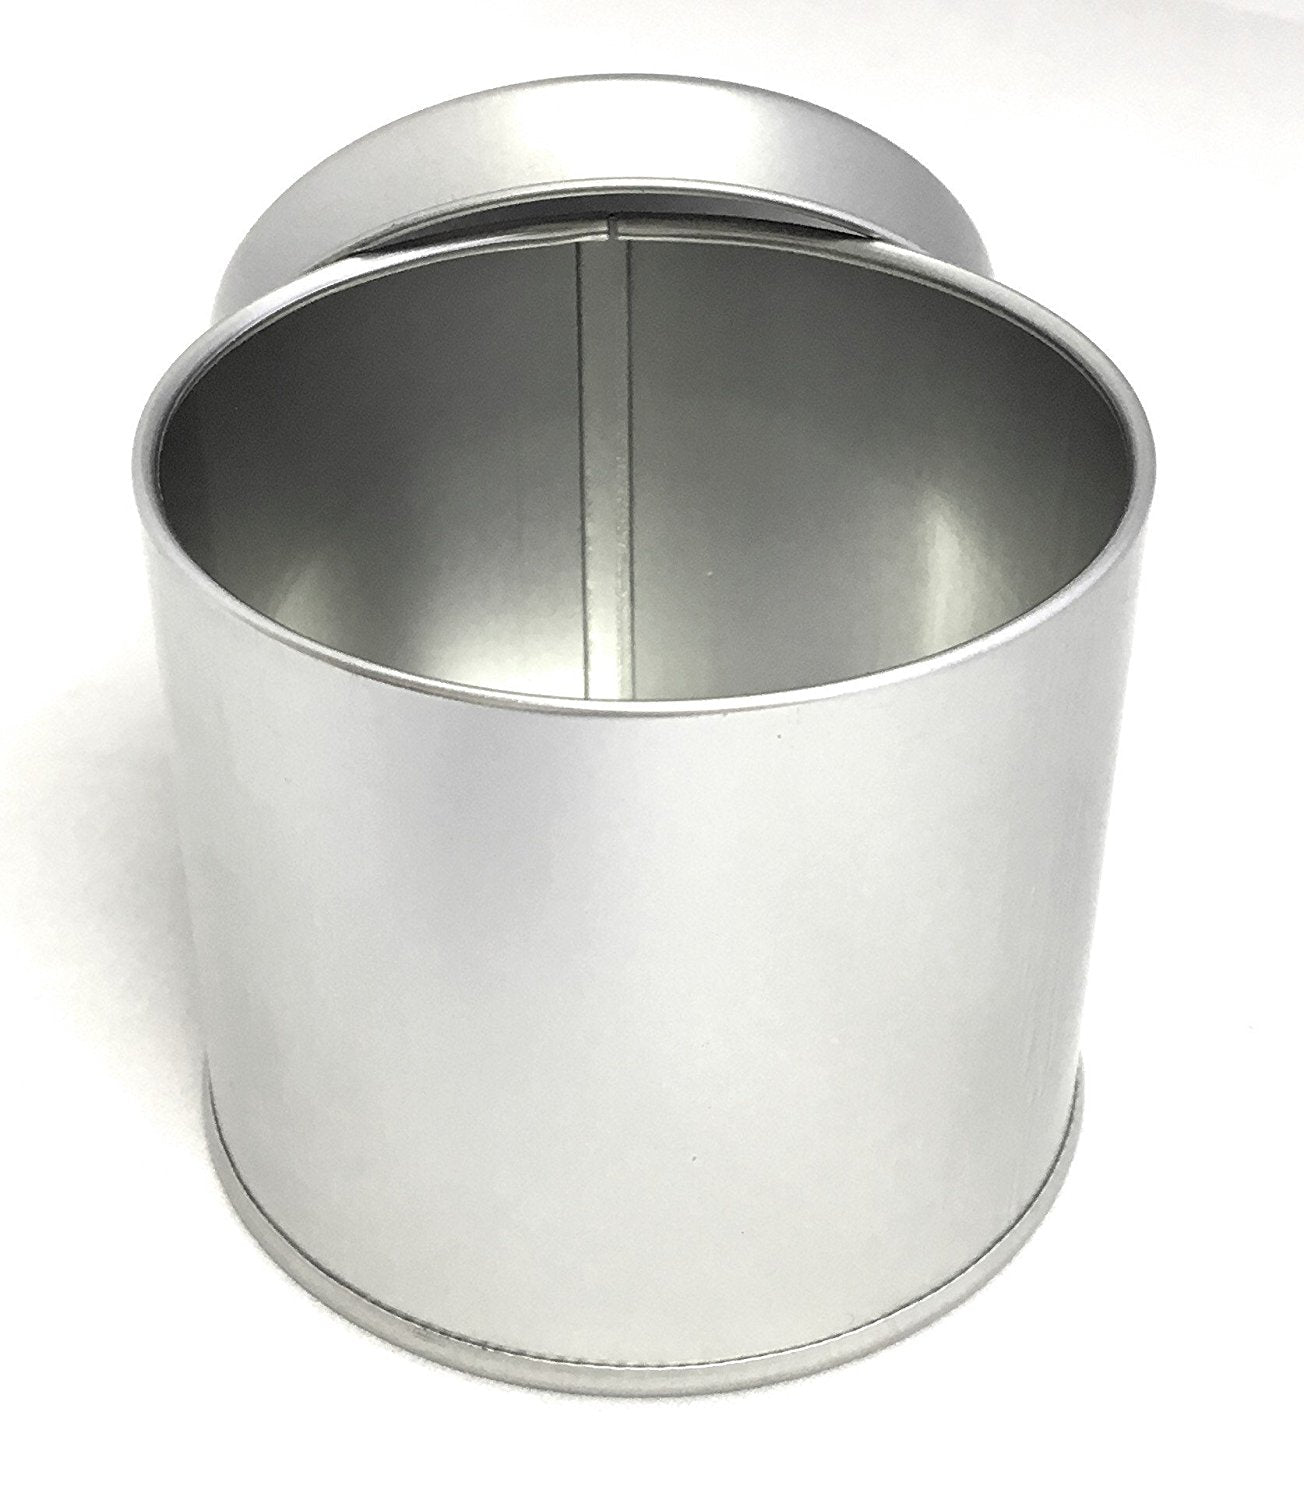 Tin Cans, 12 Pack – Large (8 oz) – 3” x 2.6” - RingBinderDepot.com